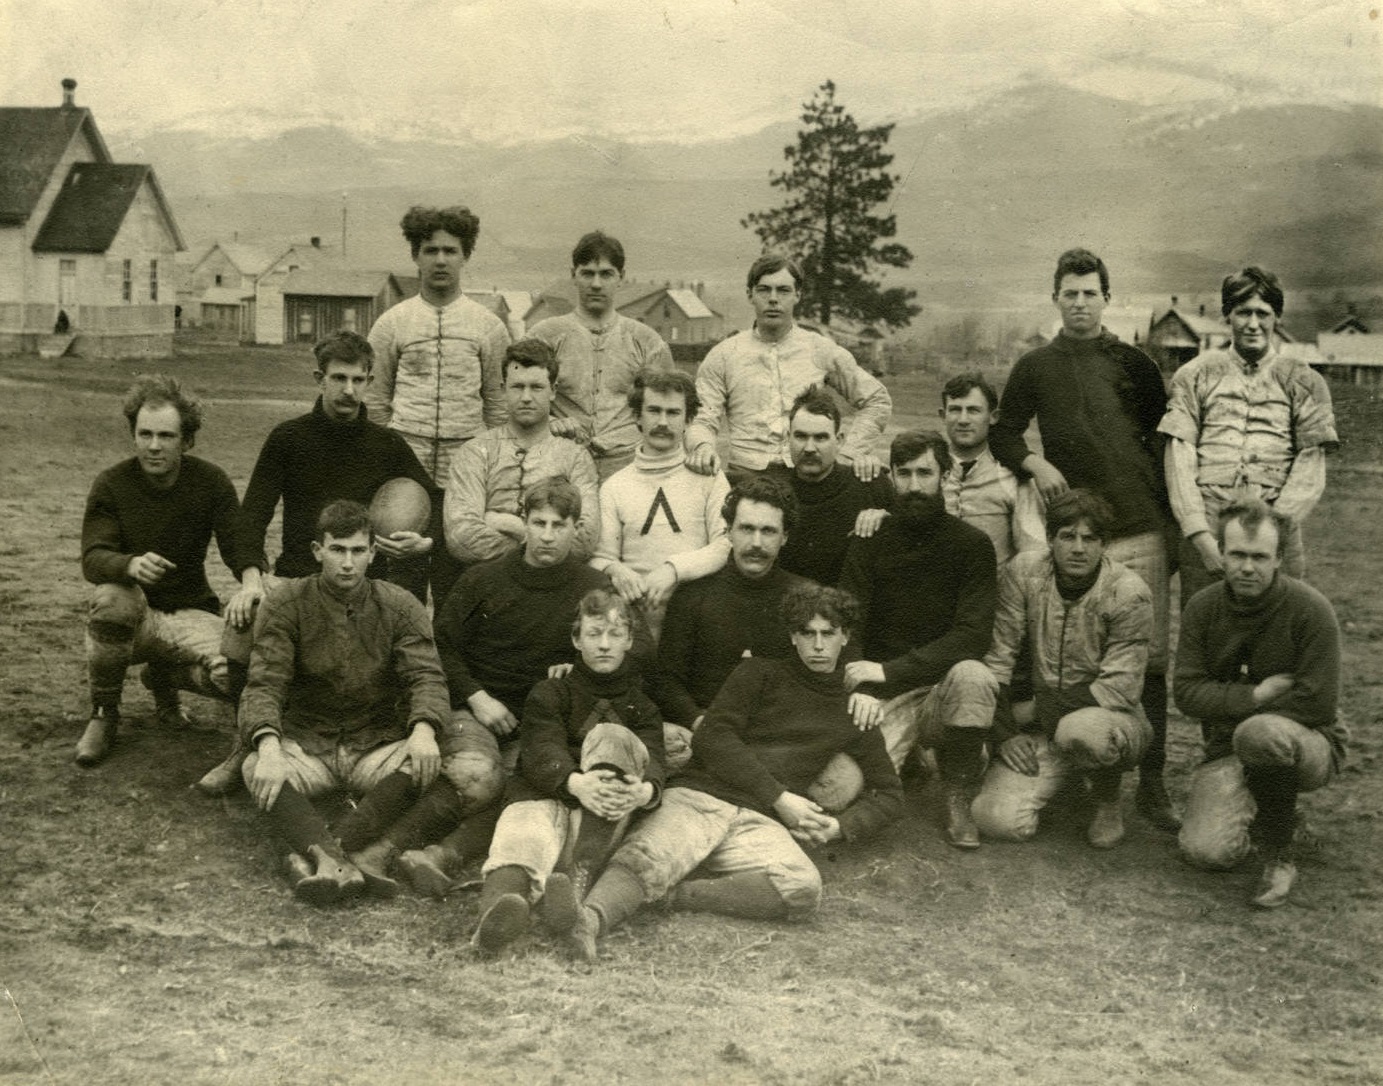 Combined Ashland Town and Normal School Teams 1897--Blaine Klum center, holding knee